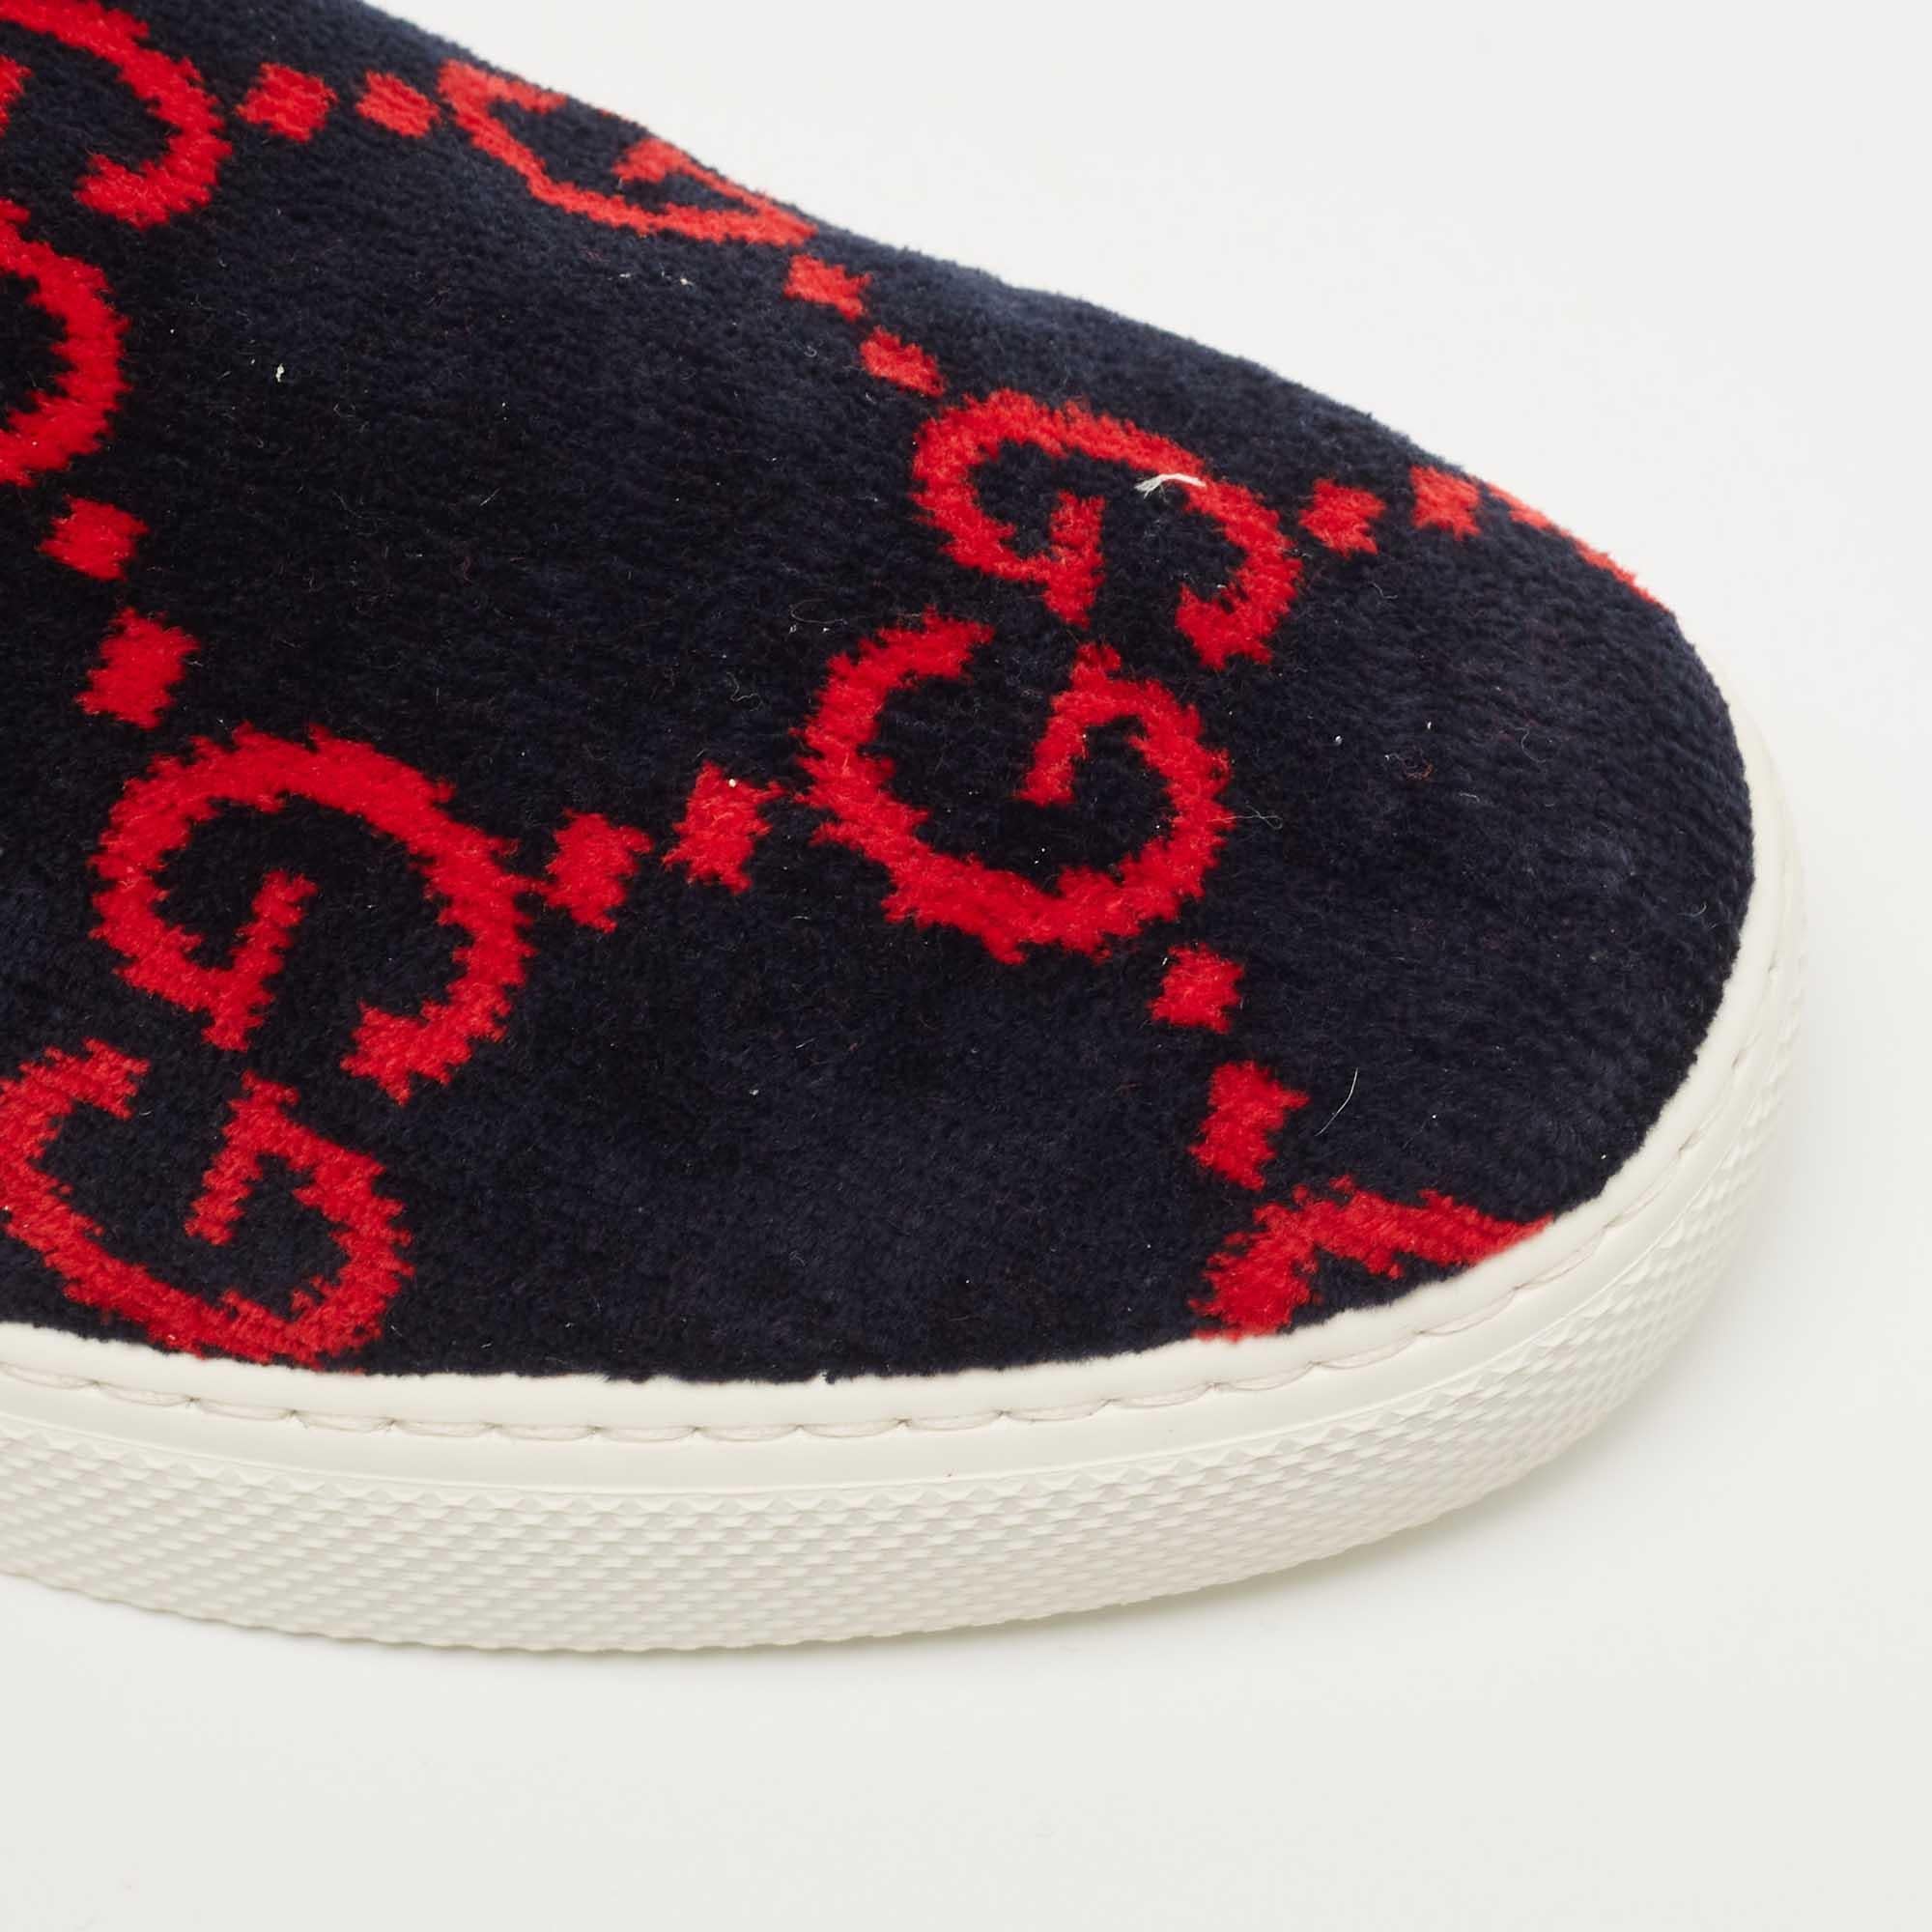 Gucci Navy Blue/Red GG Terry Fabric Slip On Sneakers Size 39.5 2